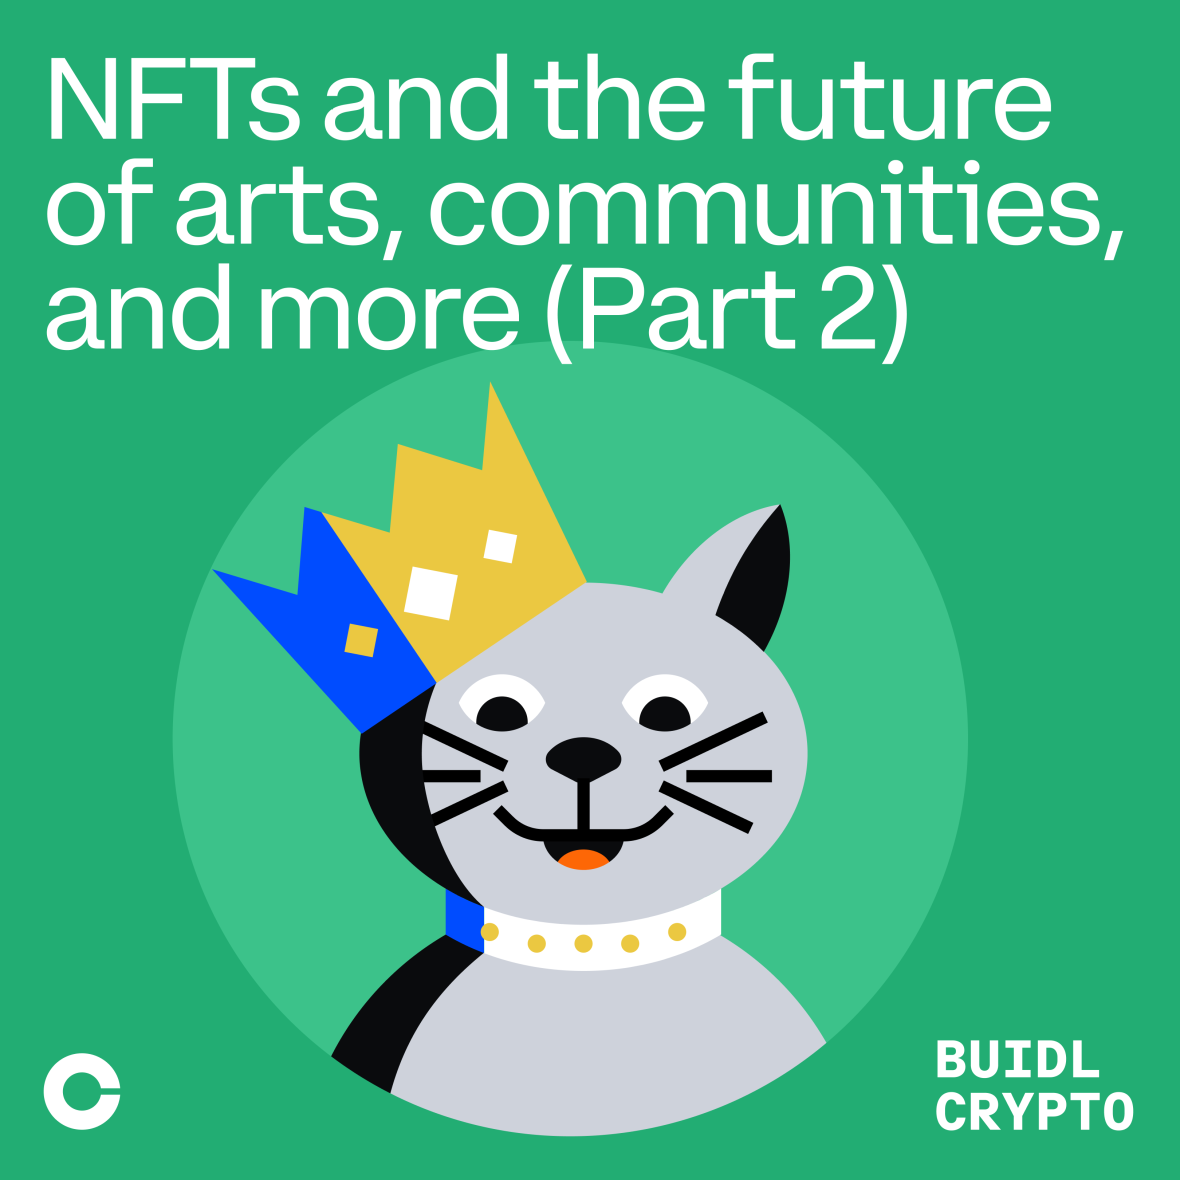 NFTs and the future or arts, communities and more (pt 2) - Square.png